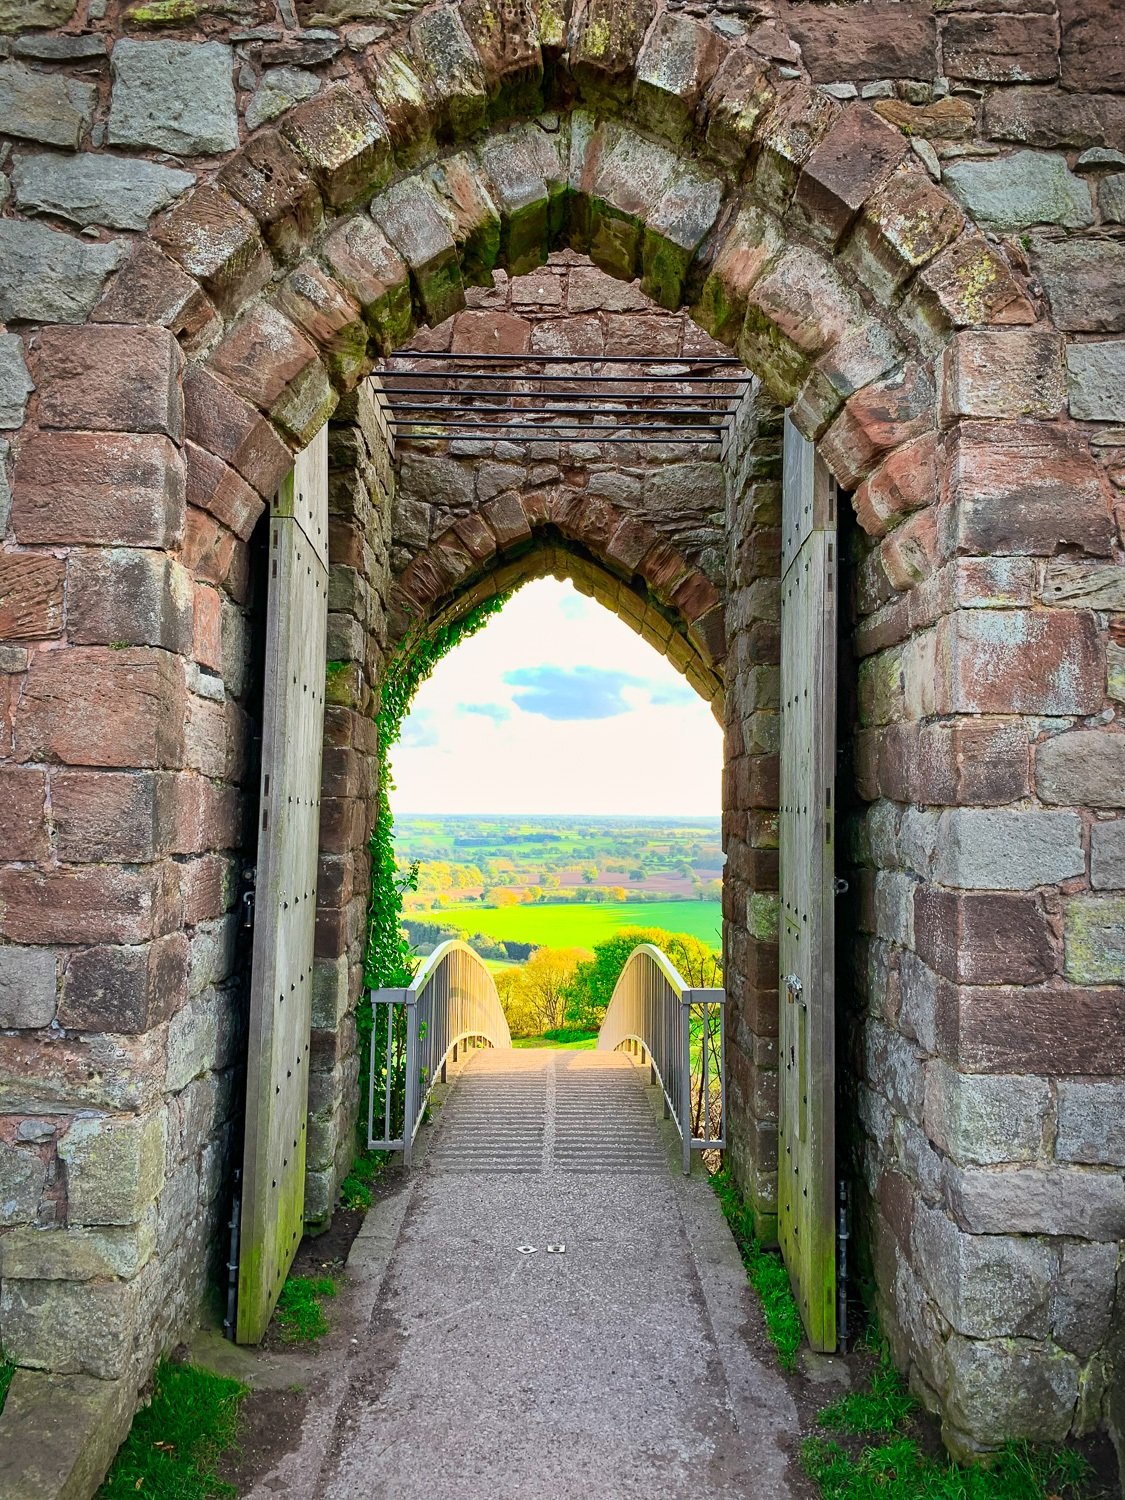 View through the gate house and over the draw bridge